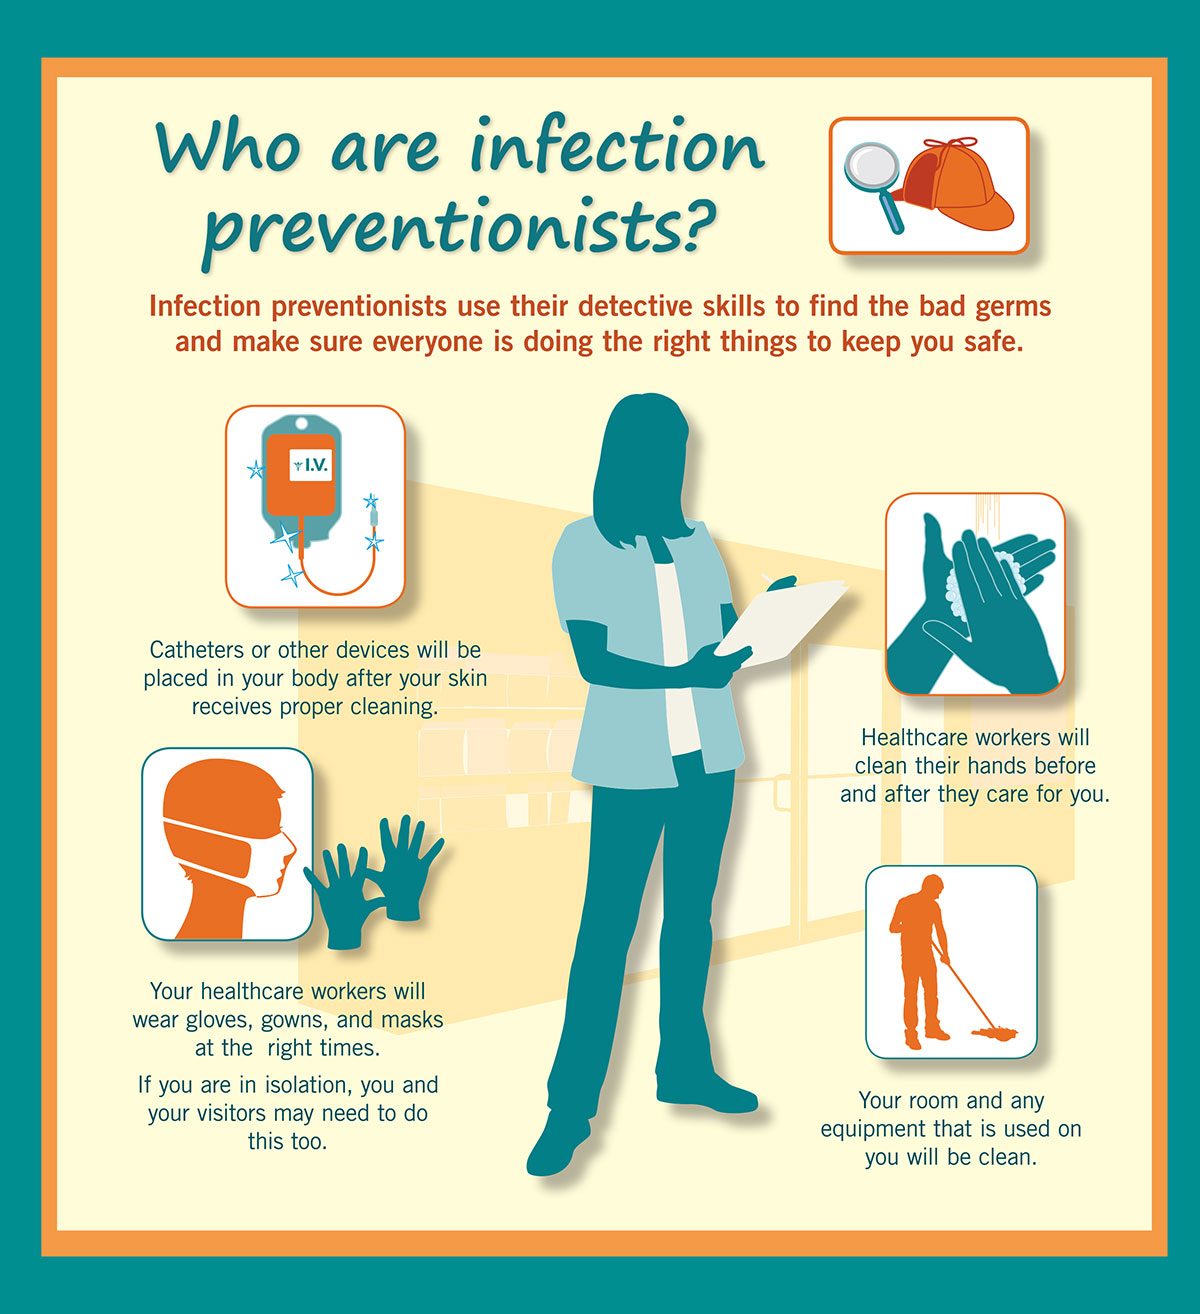 Who are Infection Perfectionists?